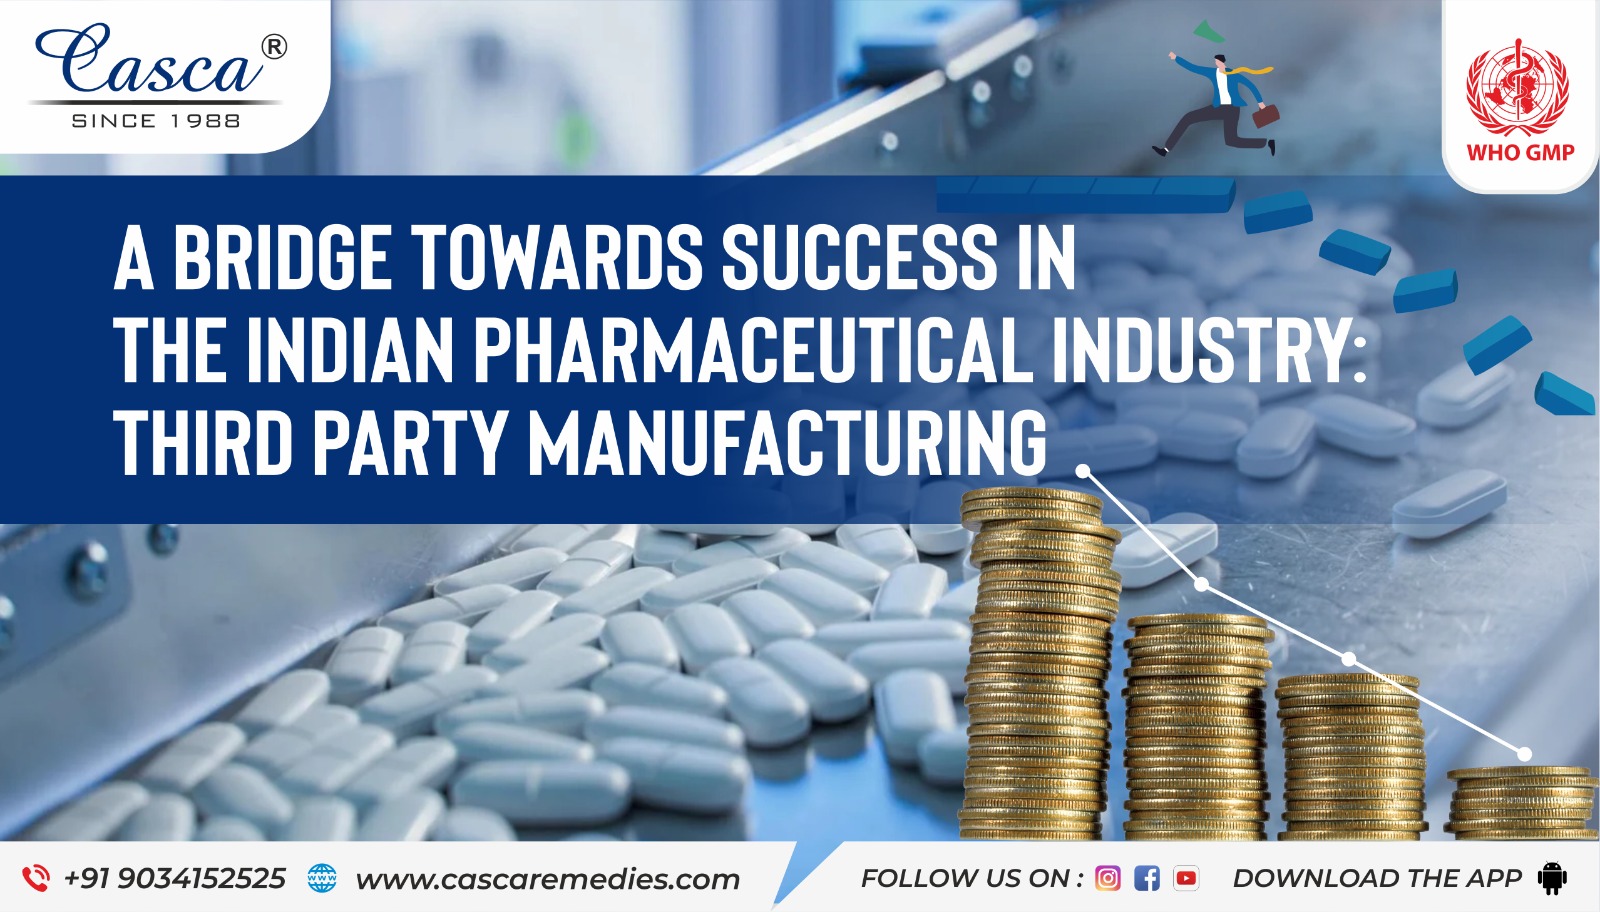 A bridge towards success in the Indian pharmaceutical industry: Third party manufacturing